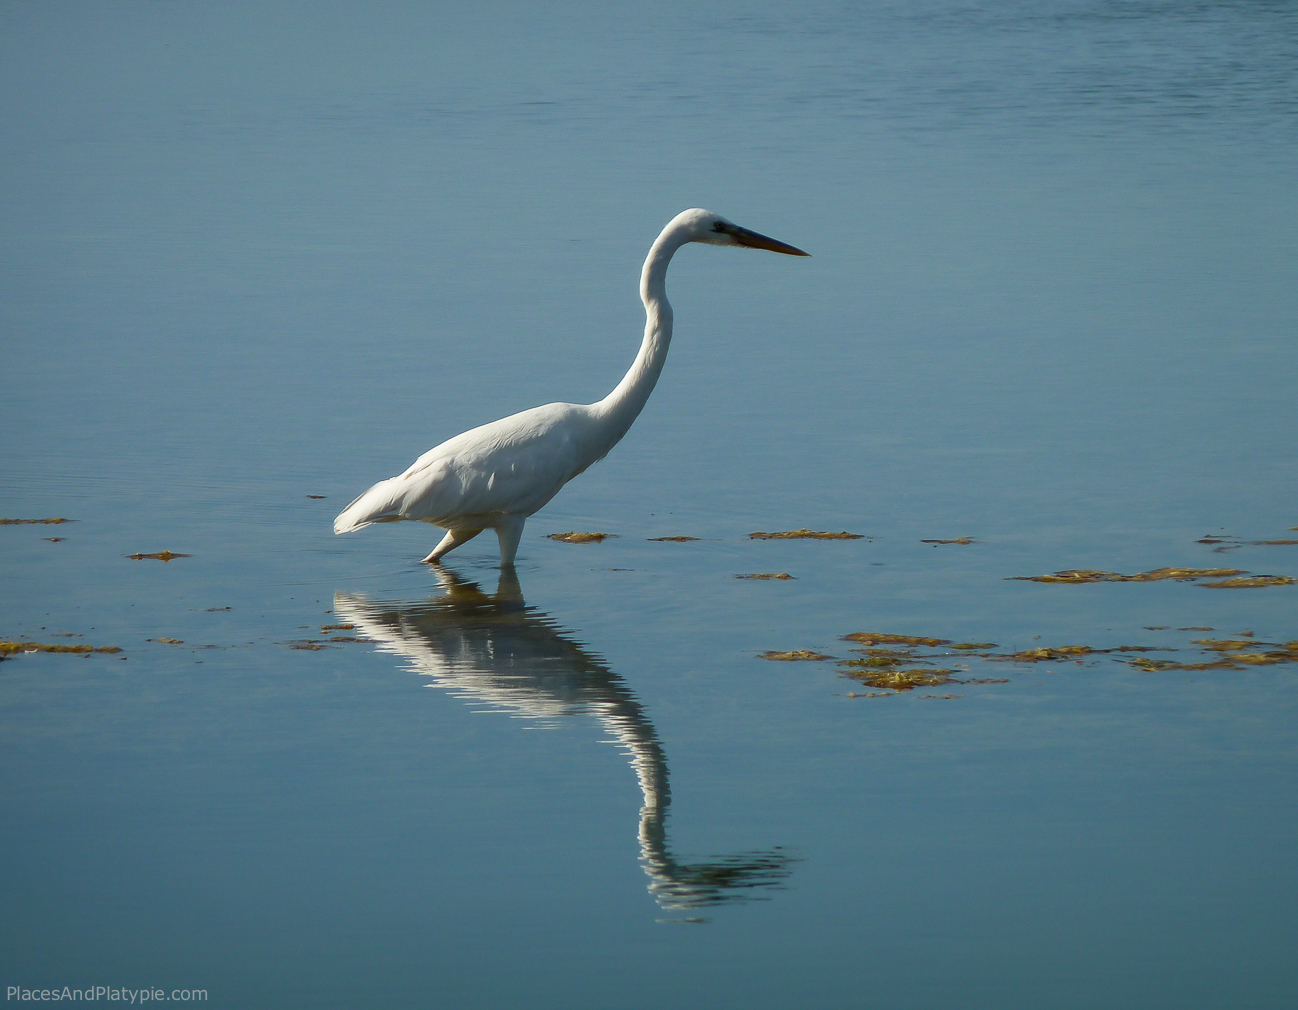 Great Egret or Great Blue Heron-White Morph? Only our friend Fred can tell.